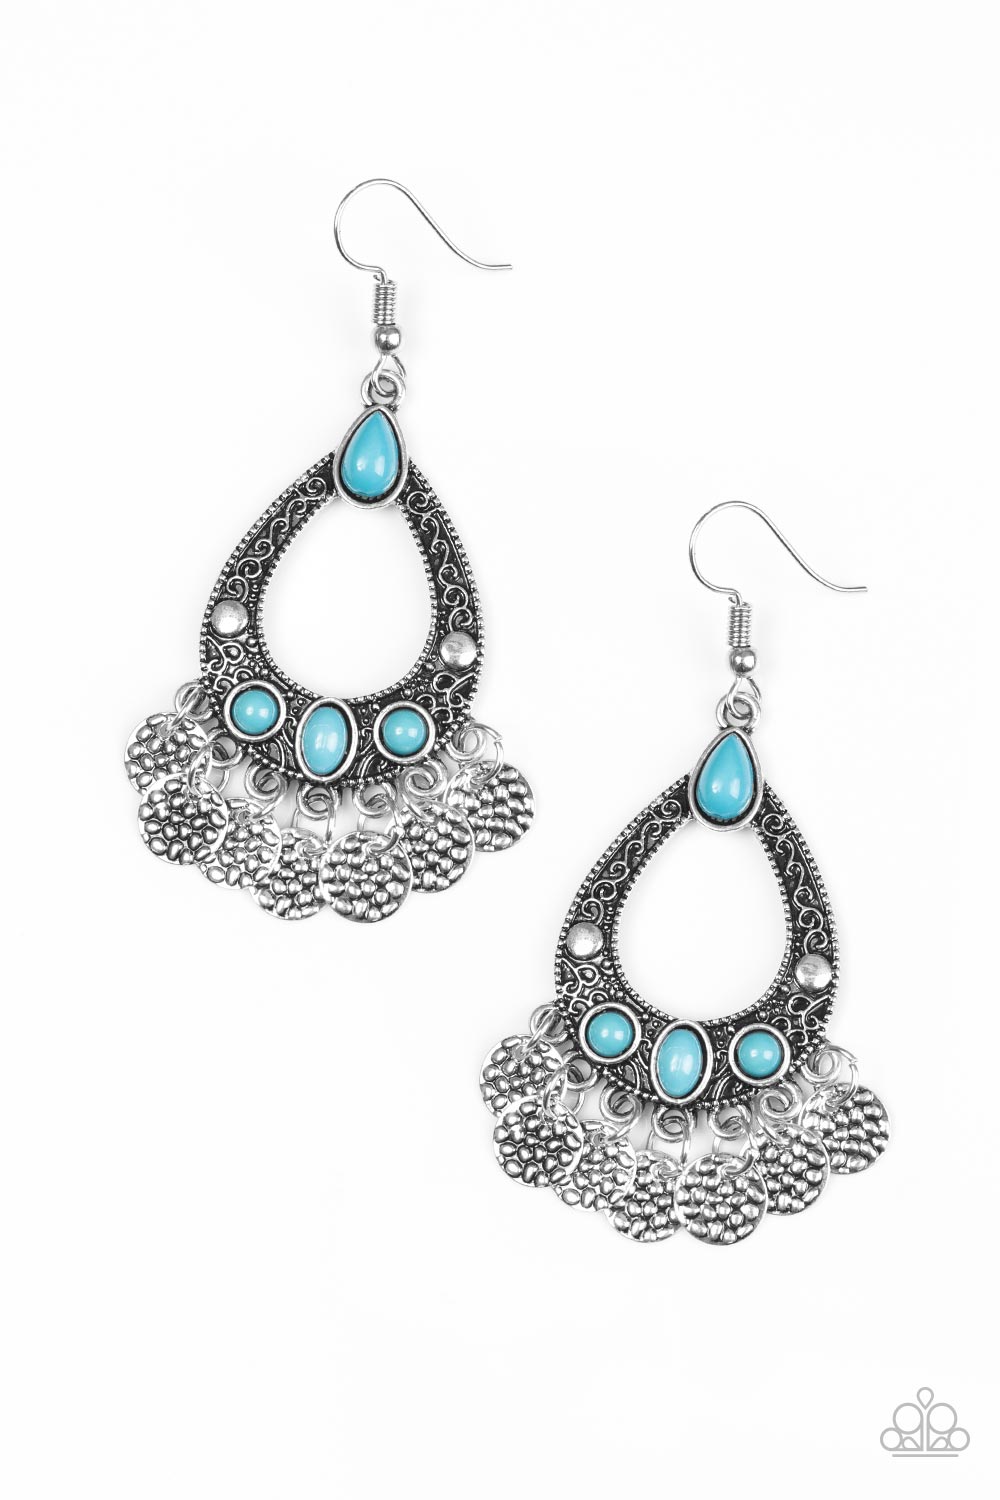 ISLAND ESCAPADE - BLUE TURQUOISE SILVER TEARDROP COINS TEXTURED CHIME FRINGE EARRINGS